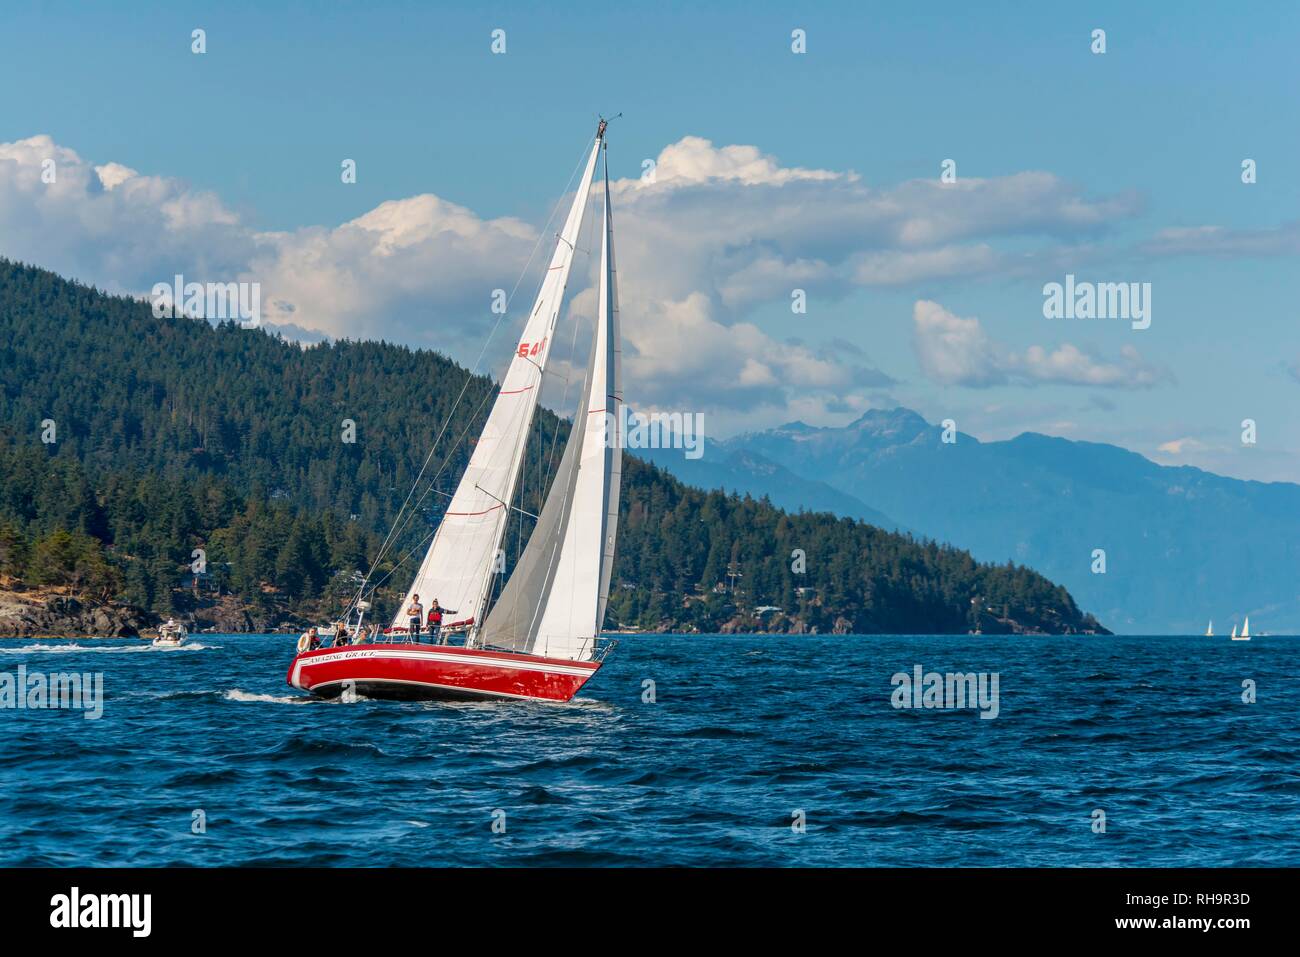 Sailboat on the sea, Howe Sound, near Vancouver, British Columbia, Canada Stock Photo